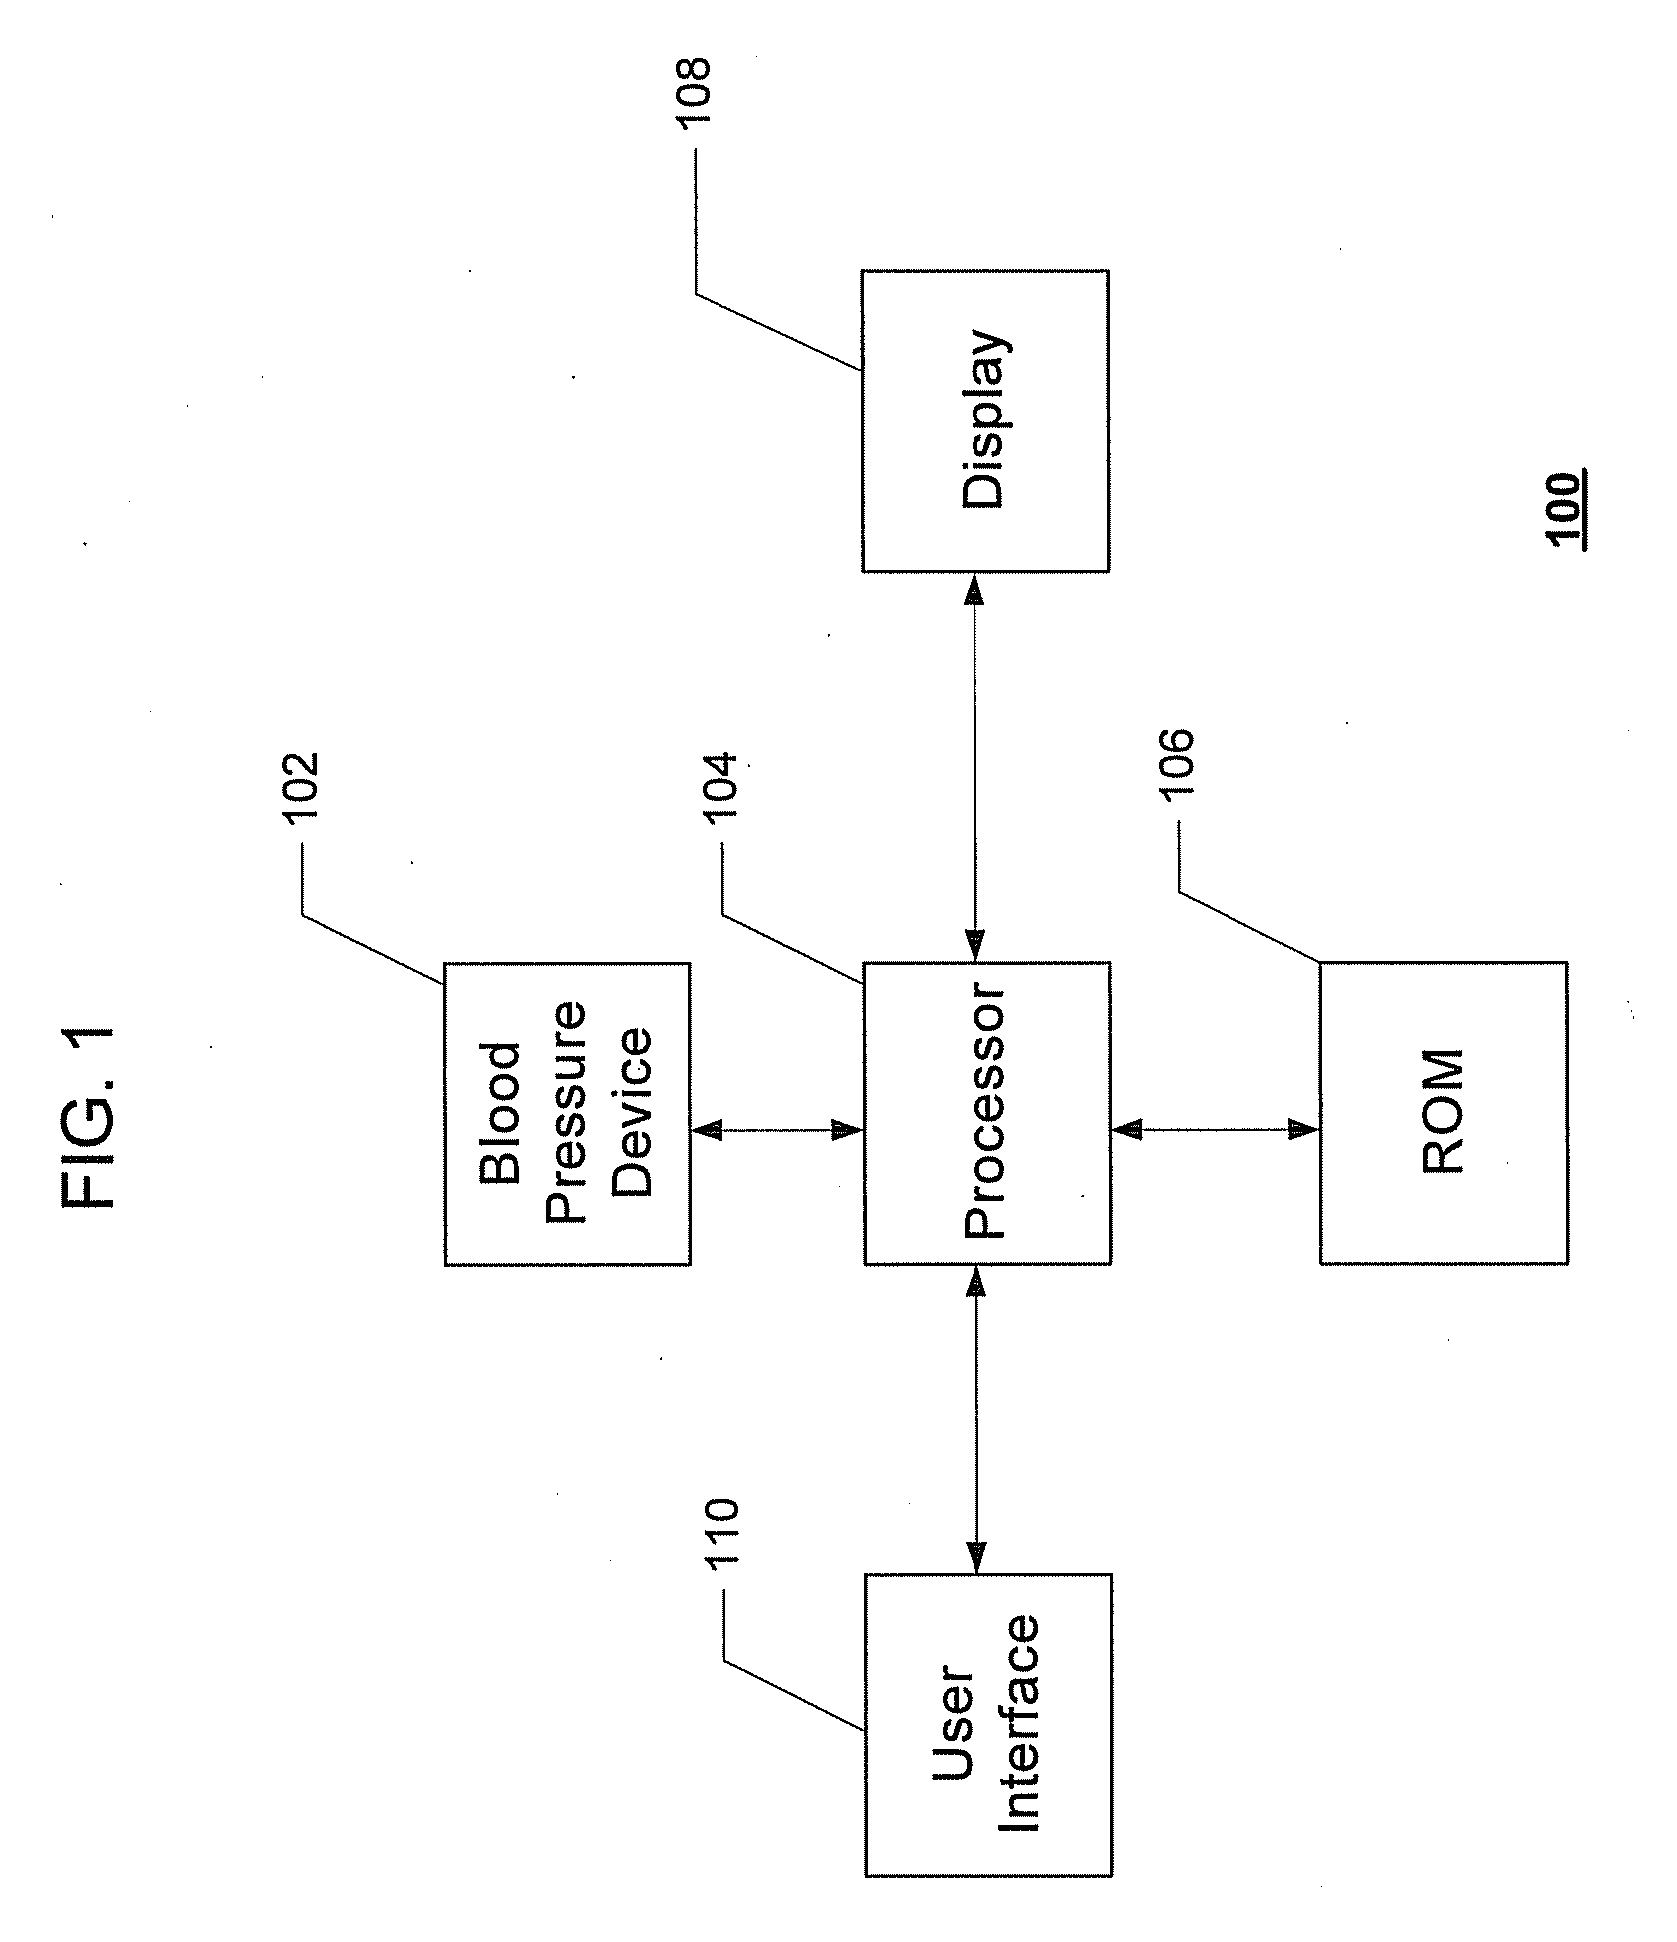 Systems and methods for model-based estimation of cardiac output and total peripheral resistance